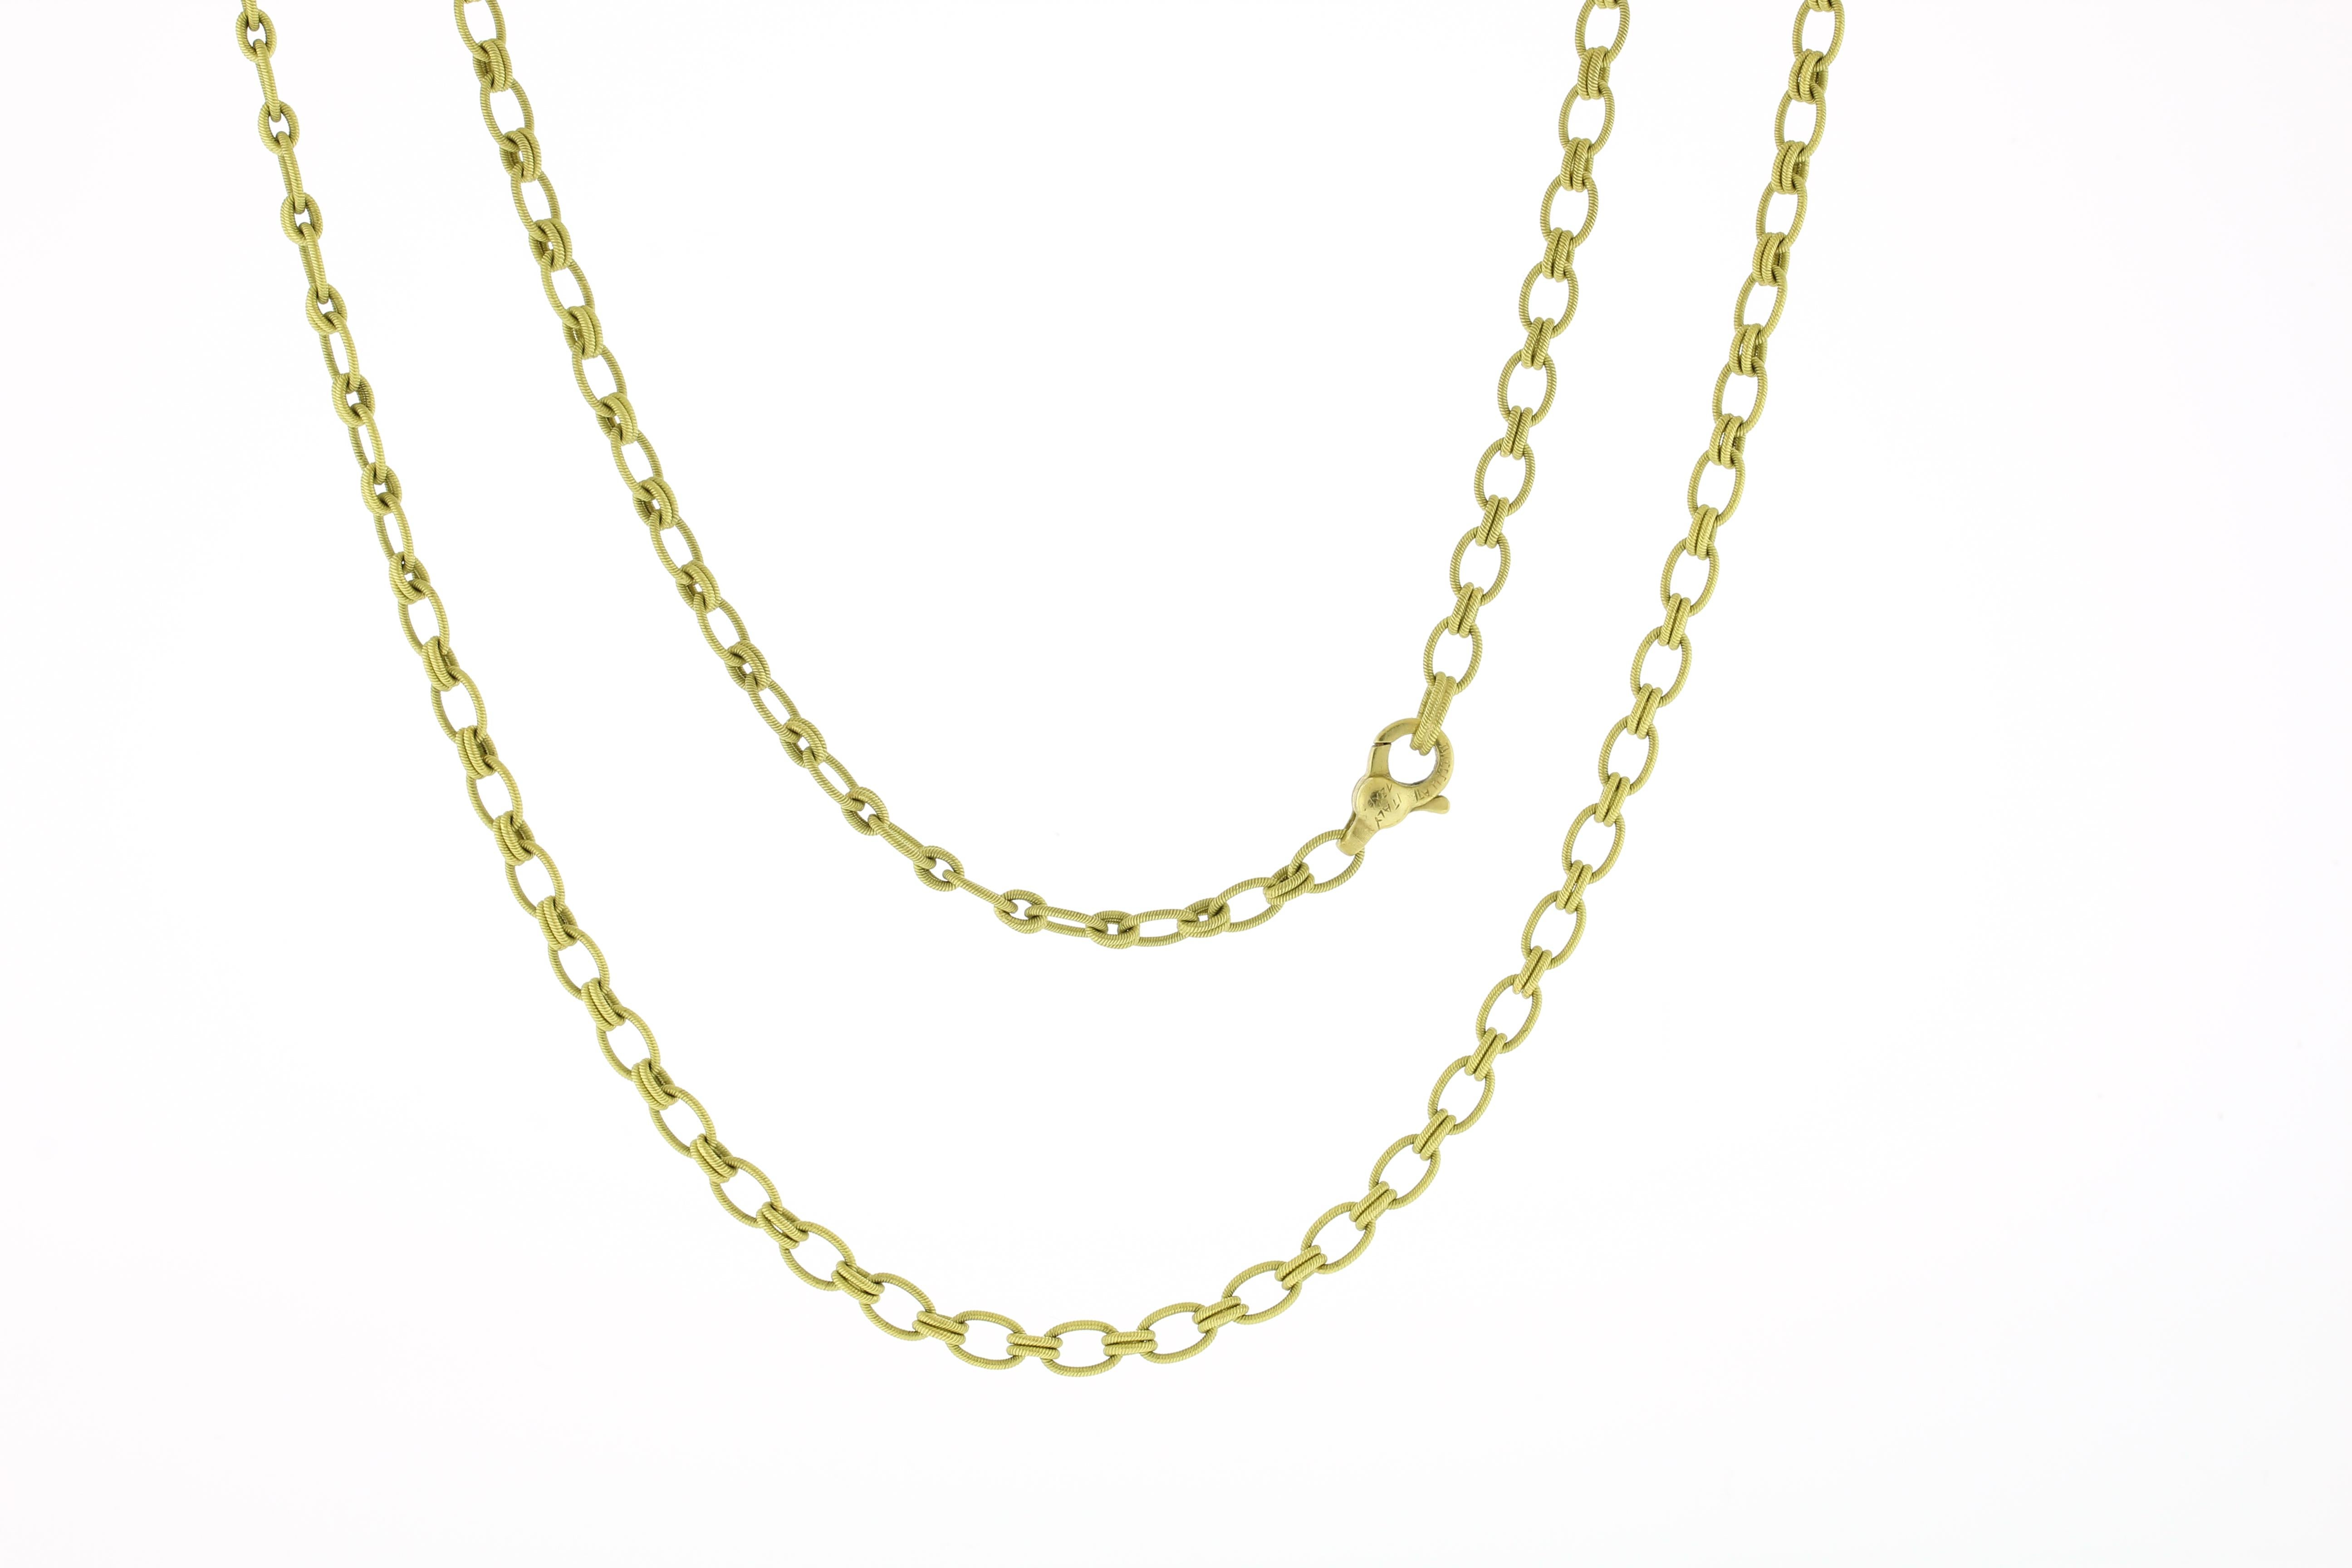 Women's or Men's Buccellati Textured Oval Link Chain Necklace For Sale